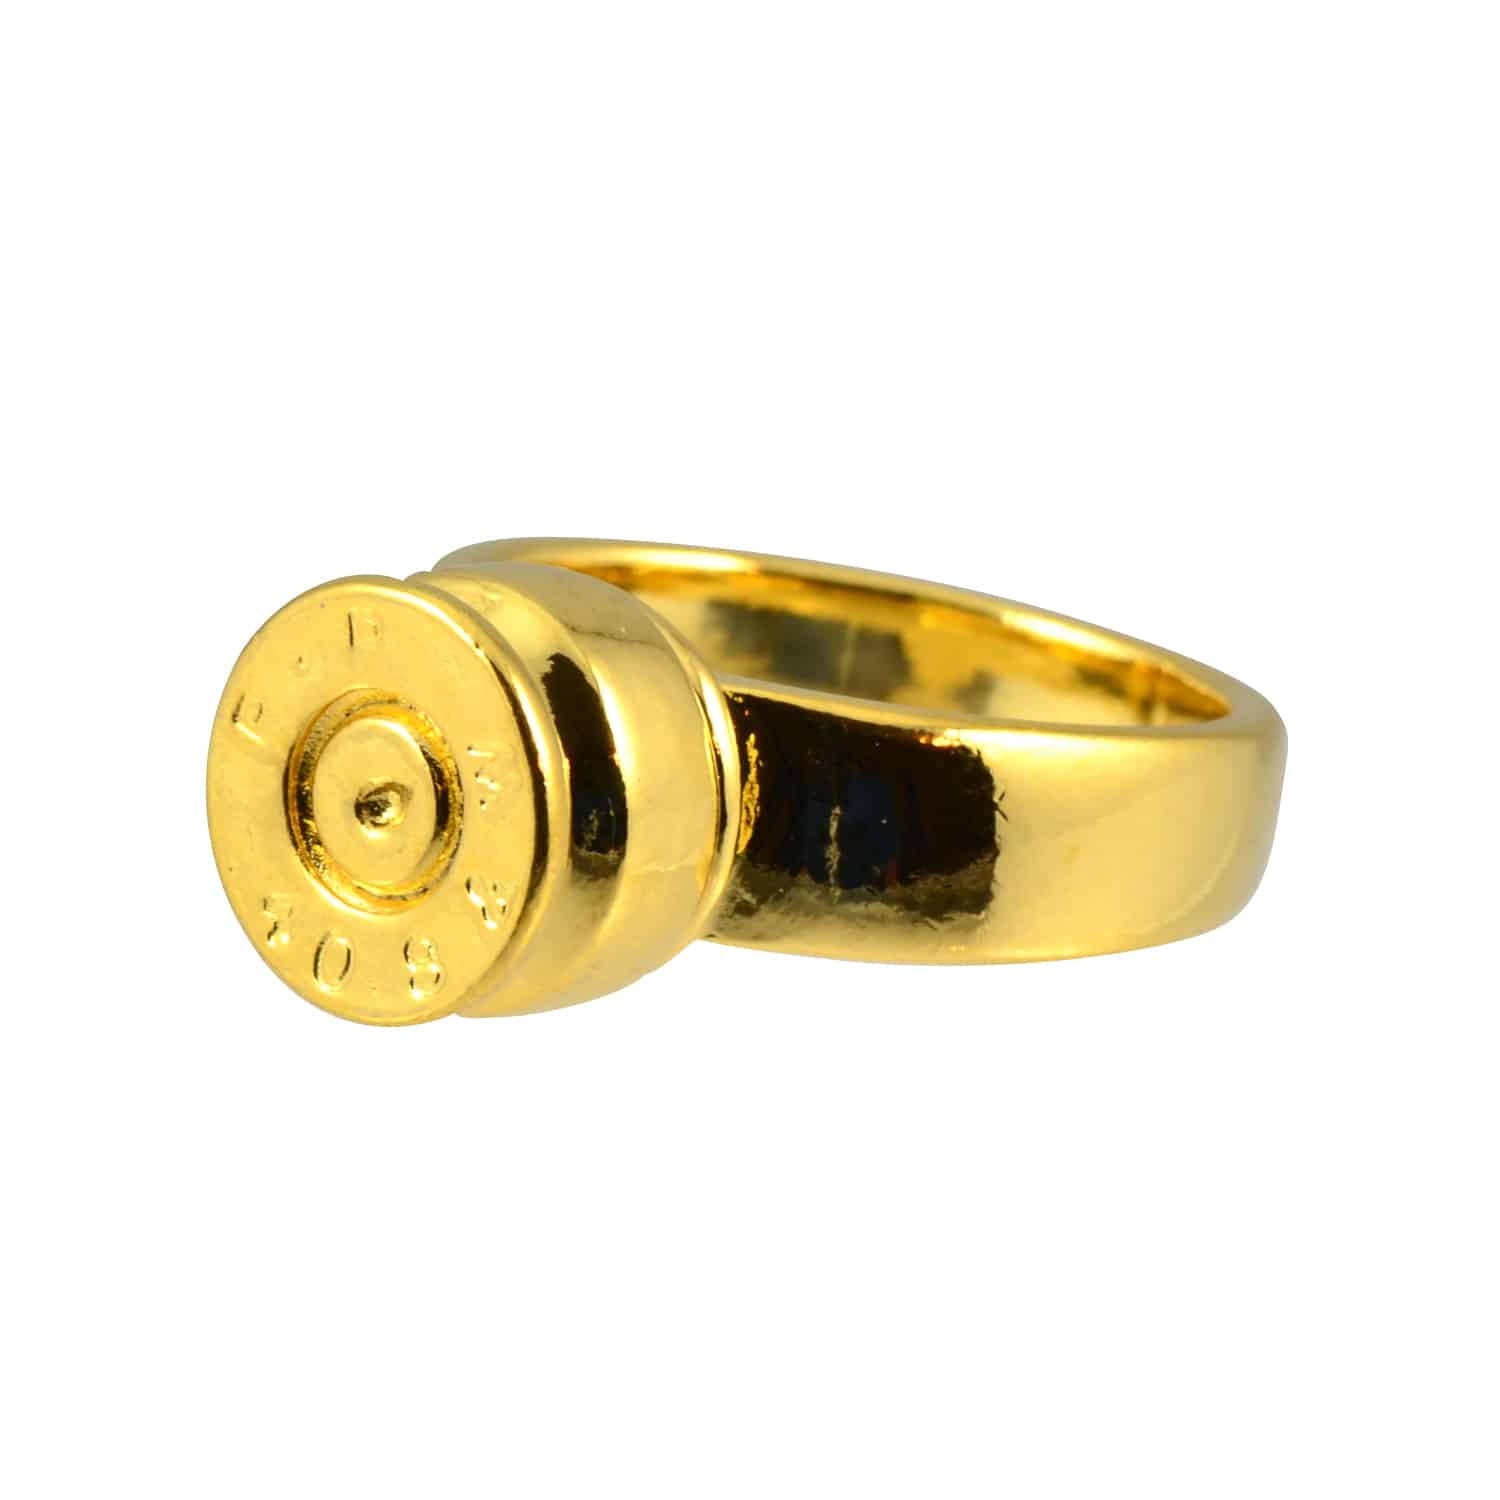 Lizzy Js Bullet Shell Ring, Gold Plated Size 7